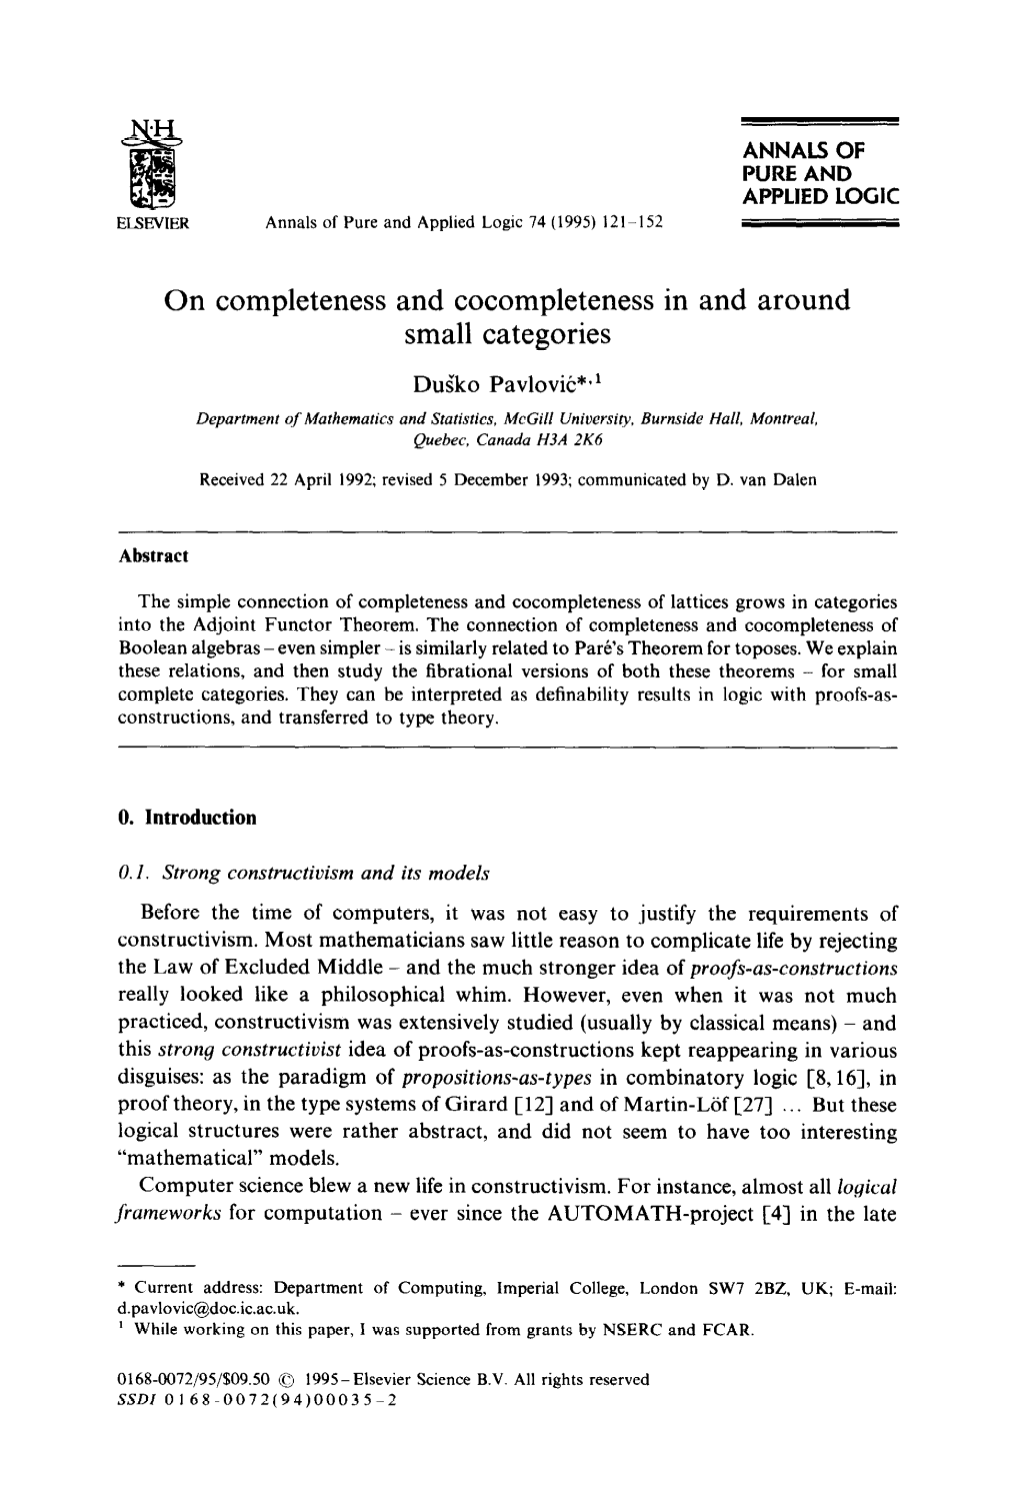 On Completeness and Cocompleteness in and Around Small Categories